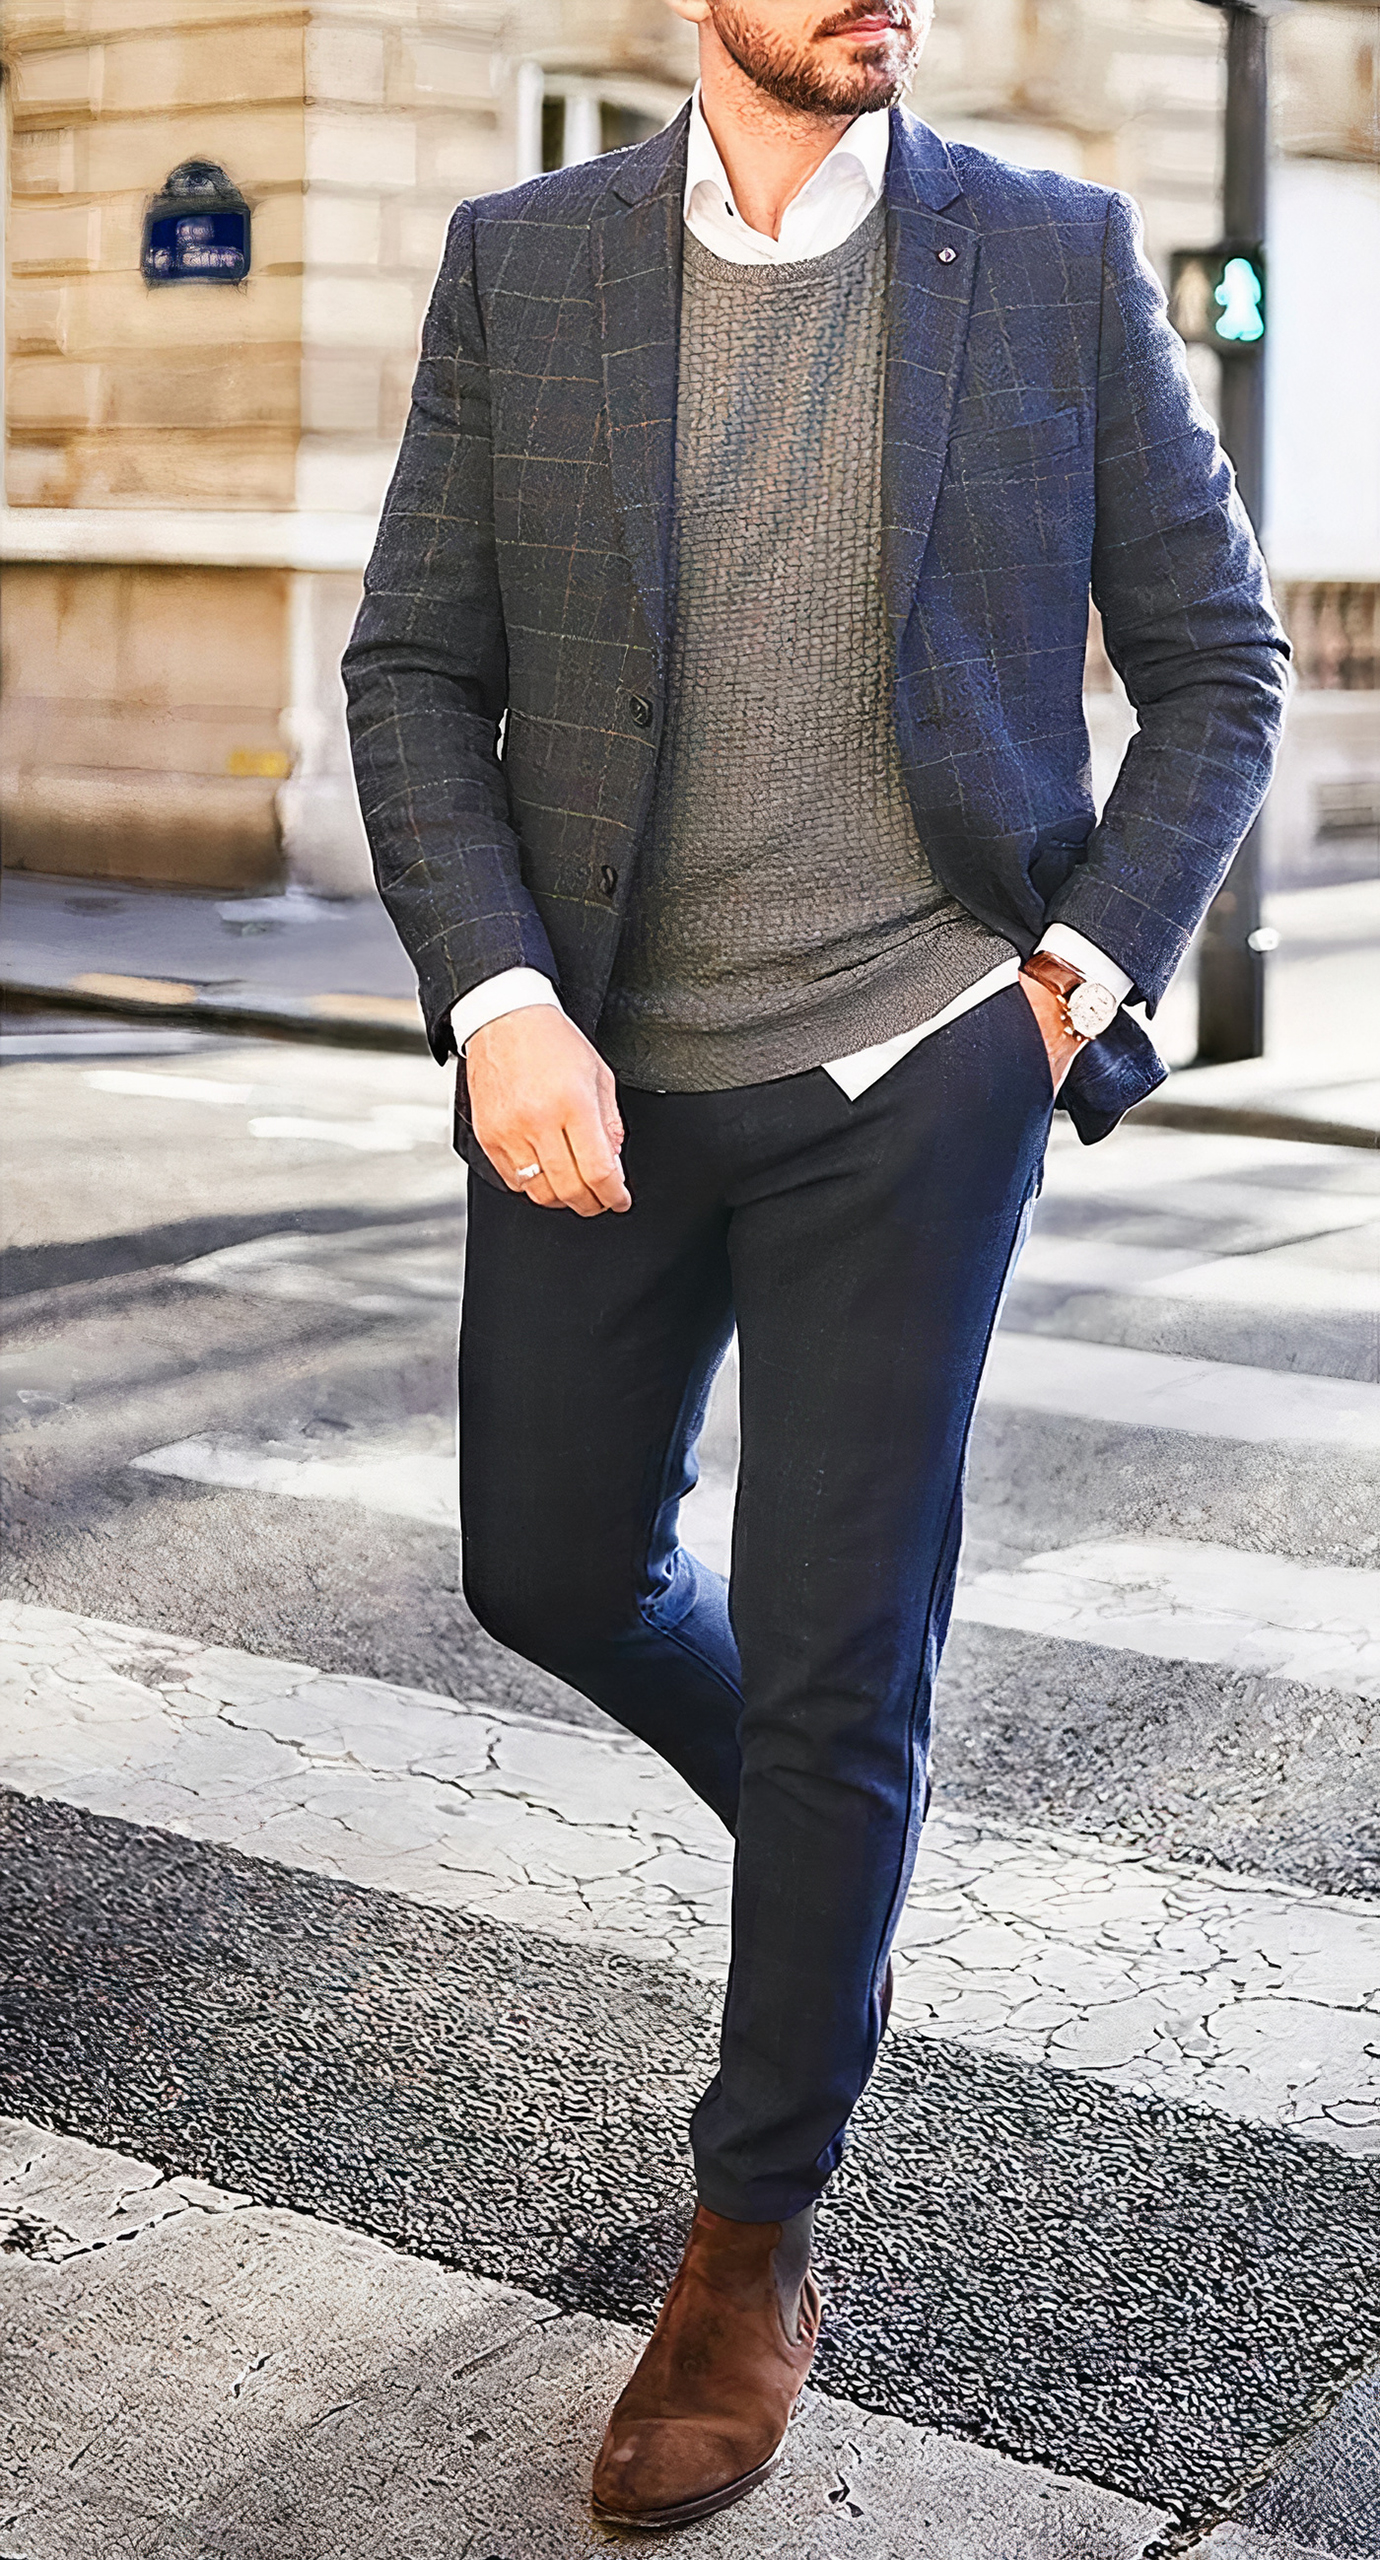 Business casual outfit: grey blazer, sweater, navy pants, and white shirt 